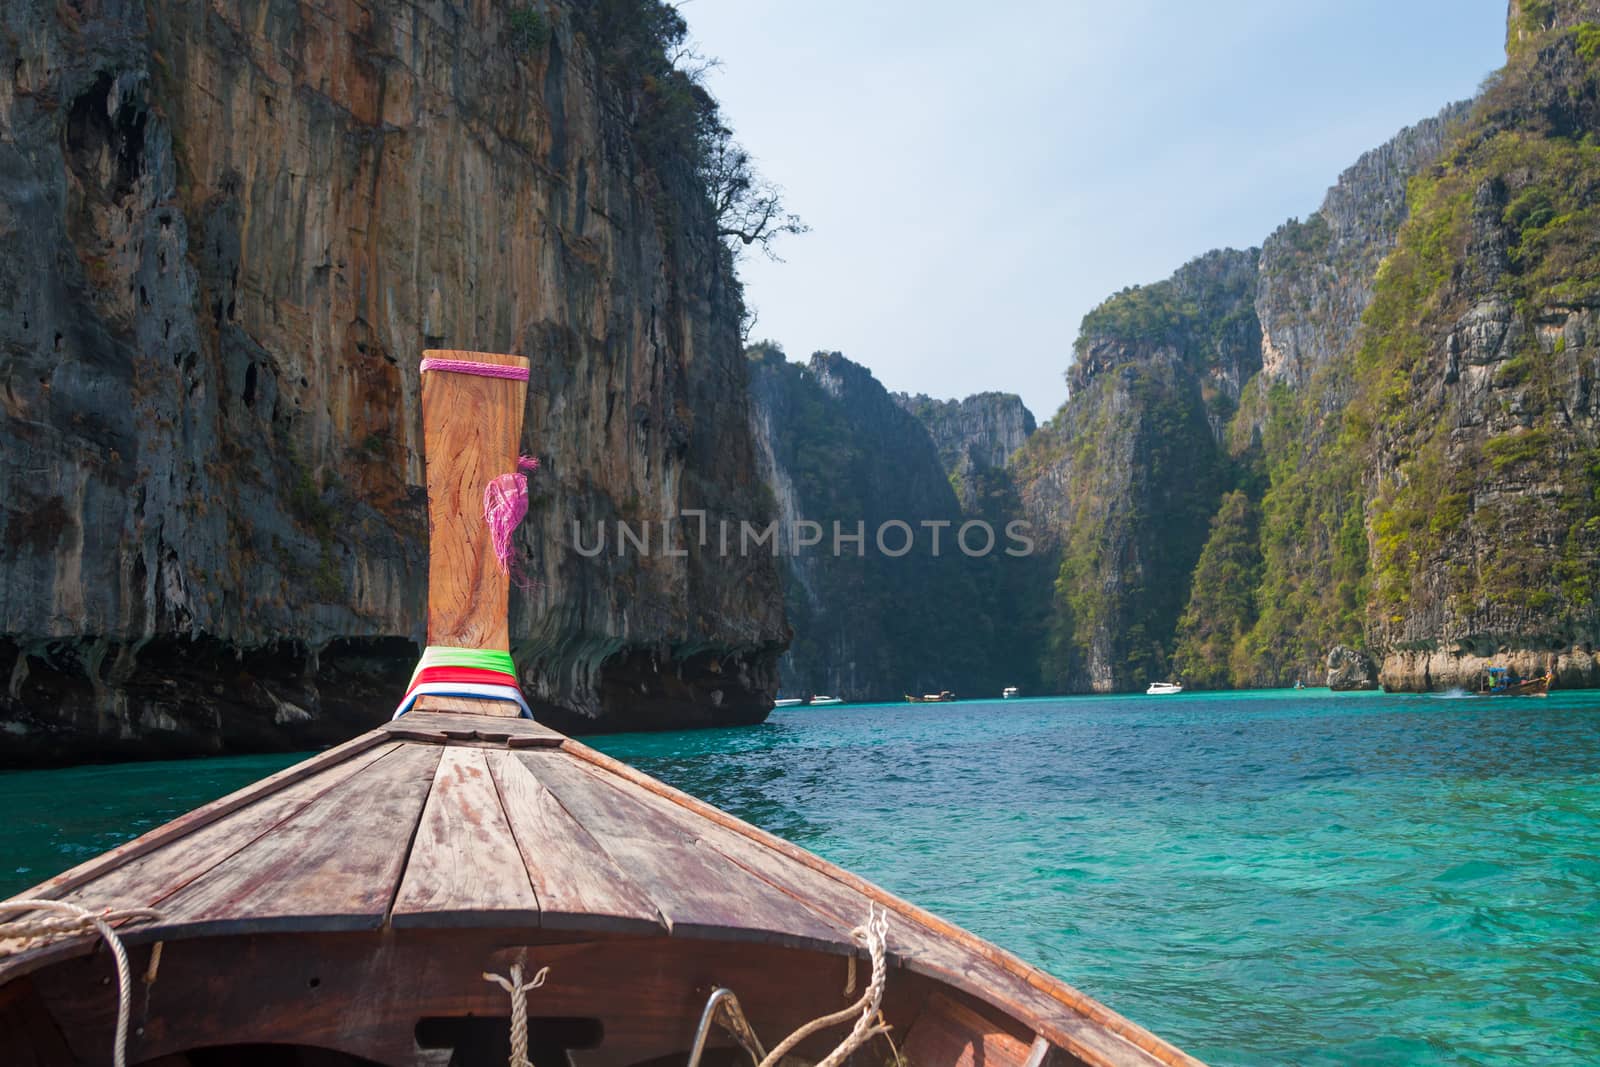 Traditional longtail boat in the famous Maya bay of Phi-phi Leh island, Thailand